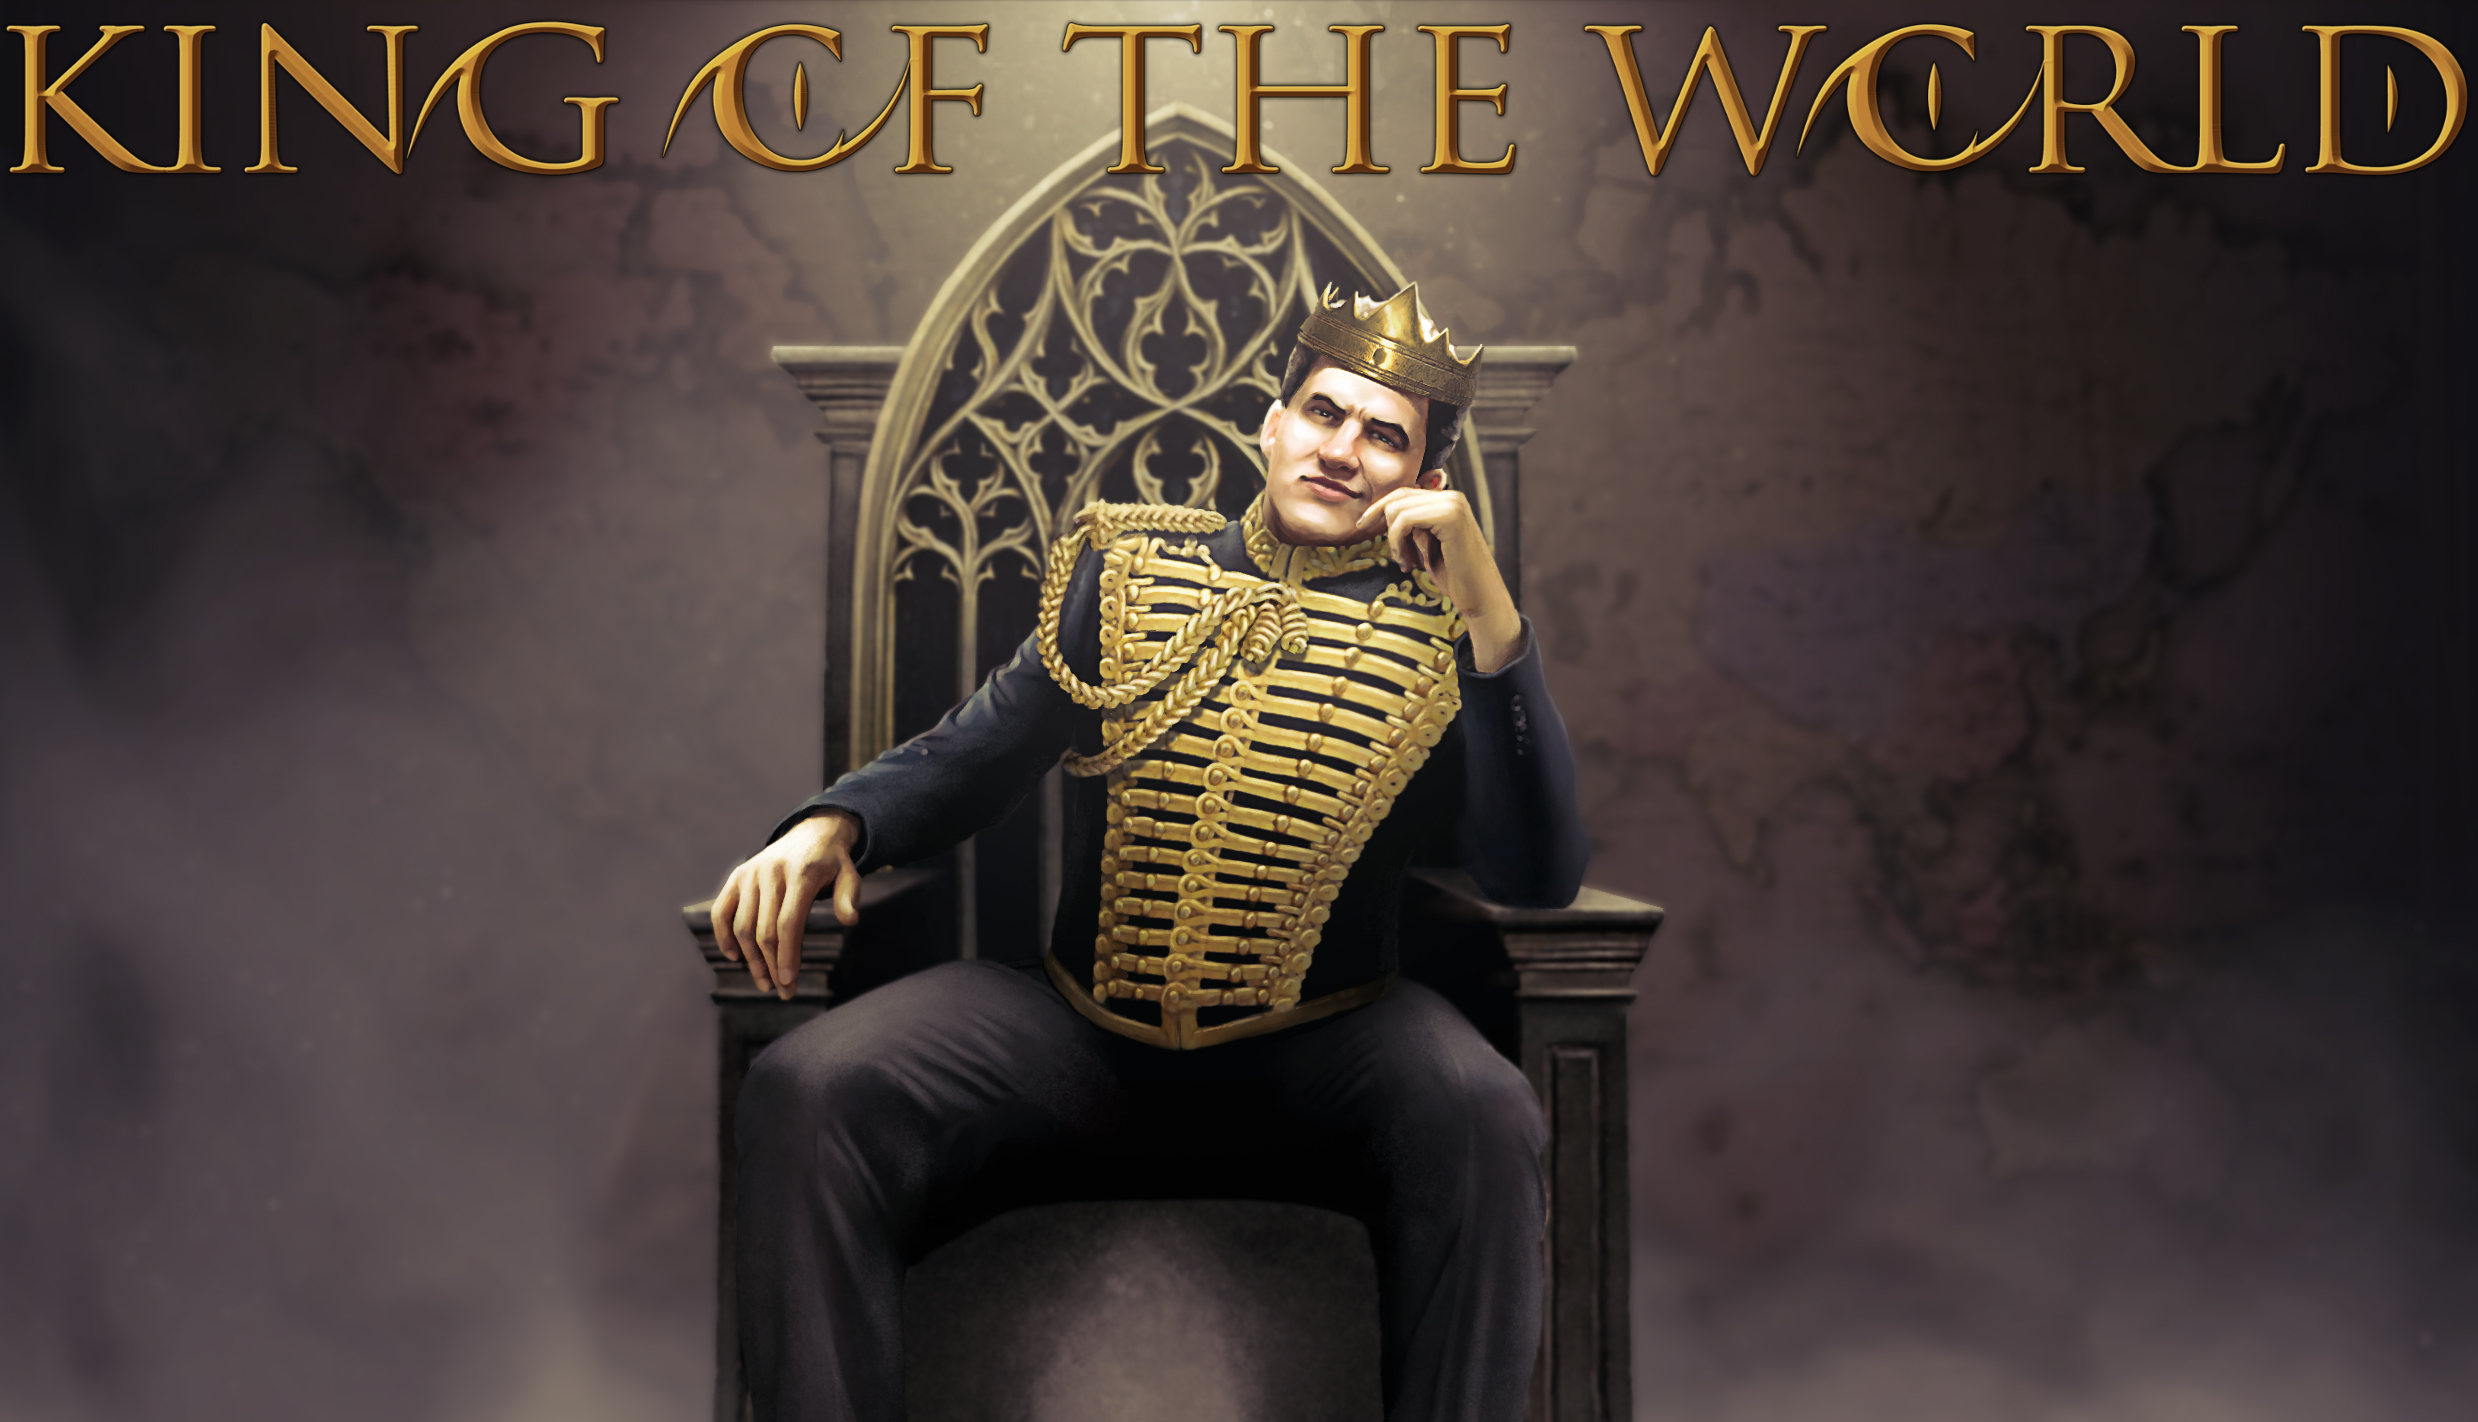 Download King of the World-HOODLUM